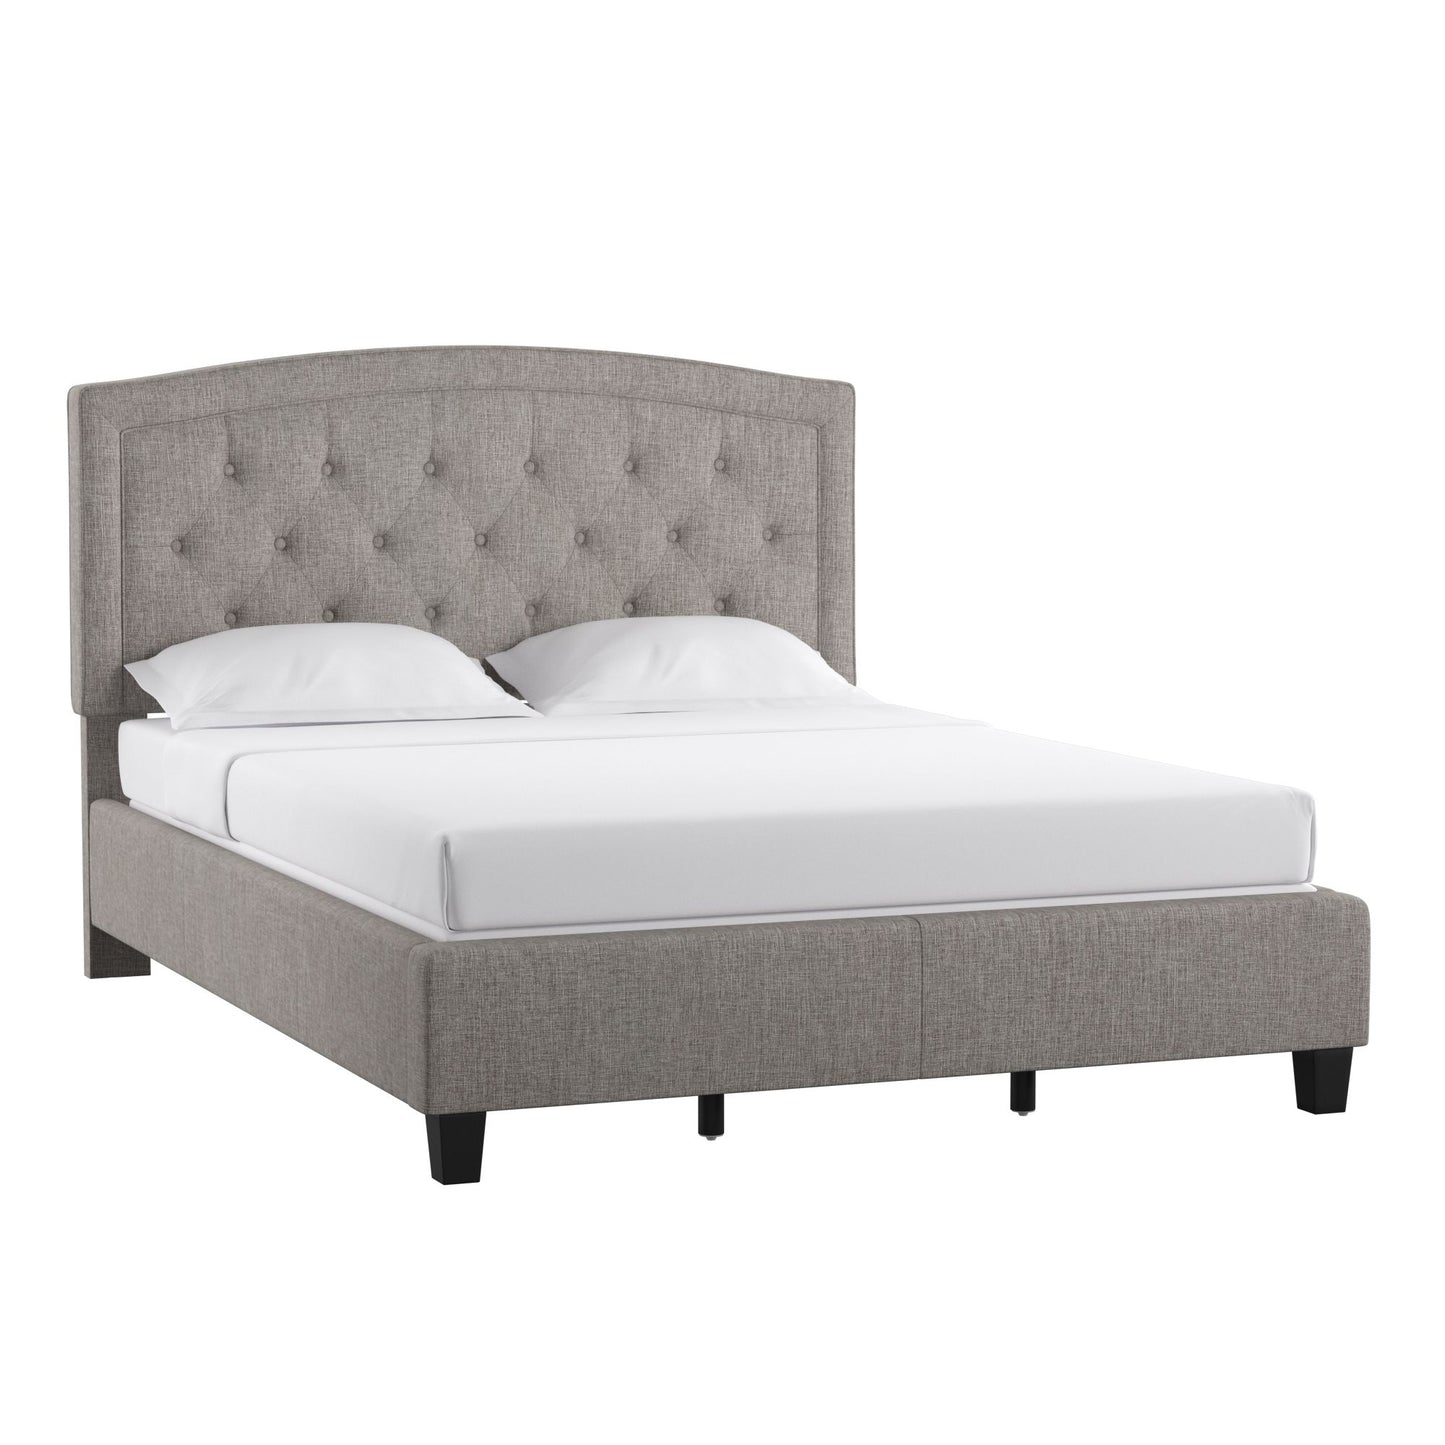 Adjustable Diamond-Tufted Arch-Back Bed - Grey, Full